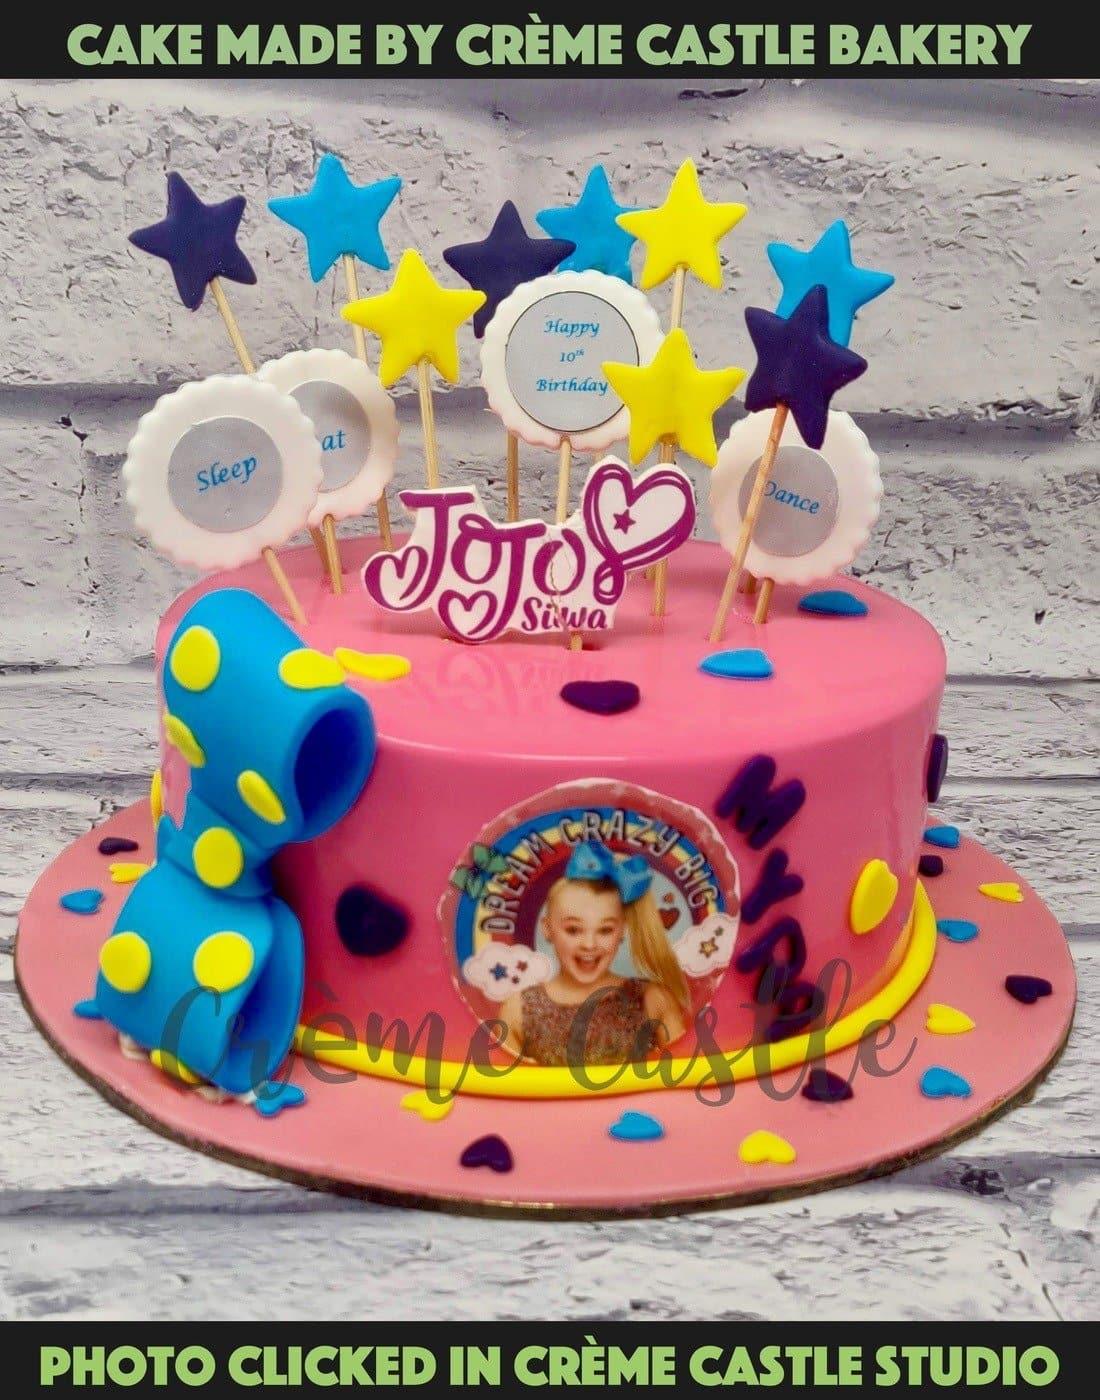 Peppy Teenager cake - Creme Castle